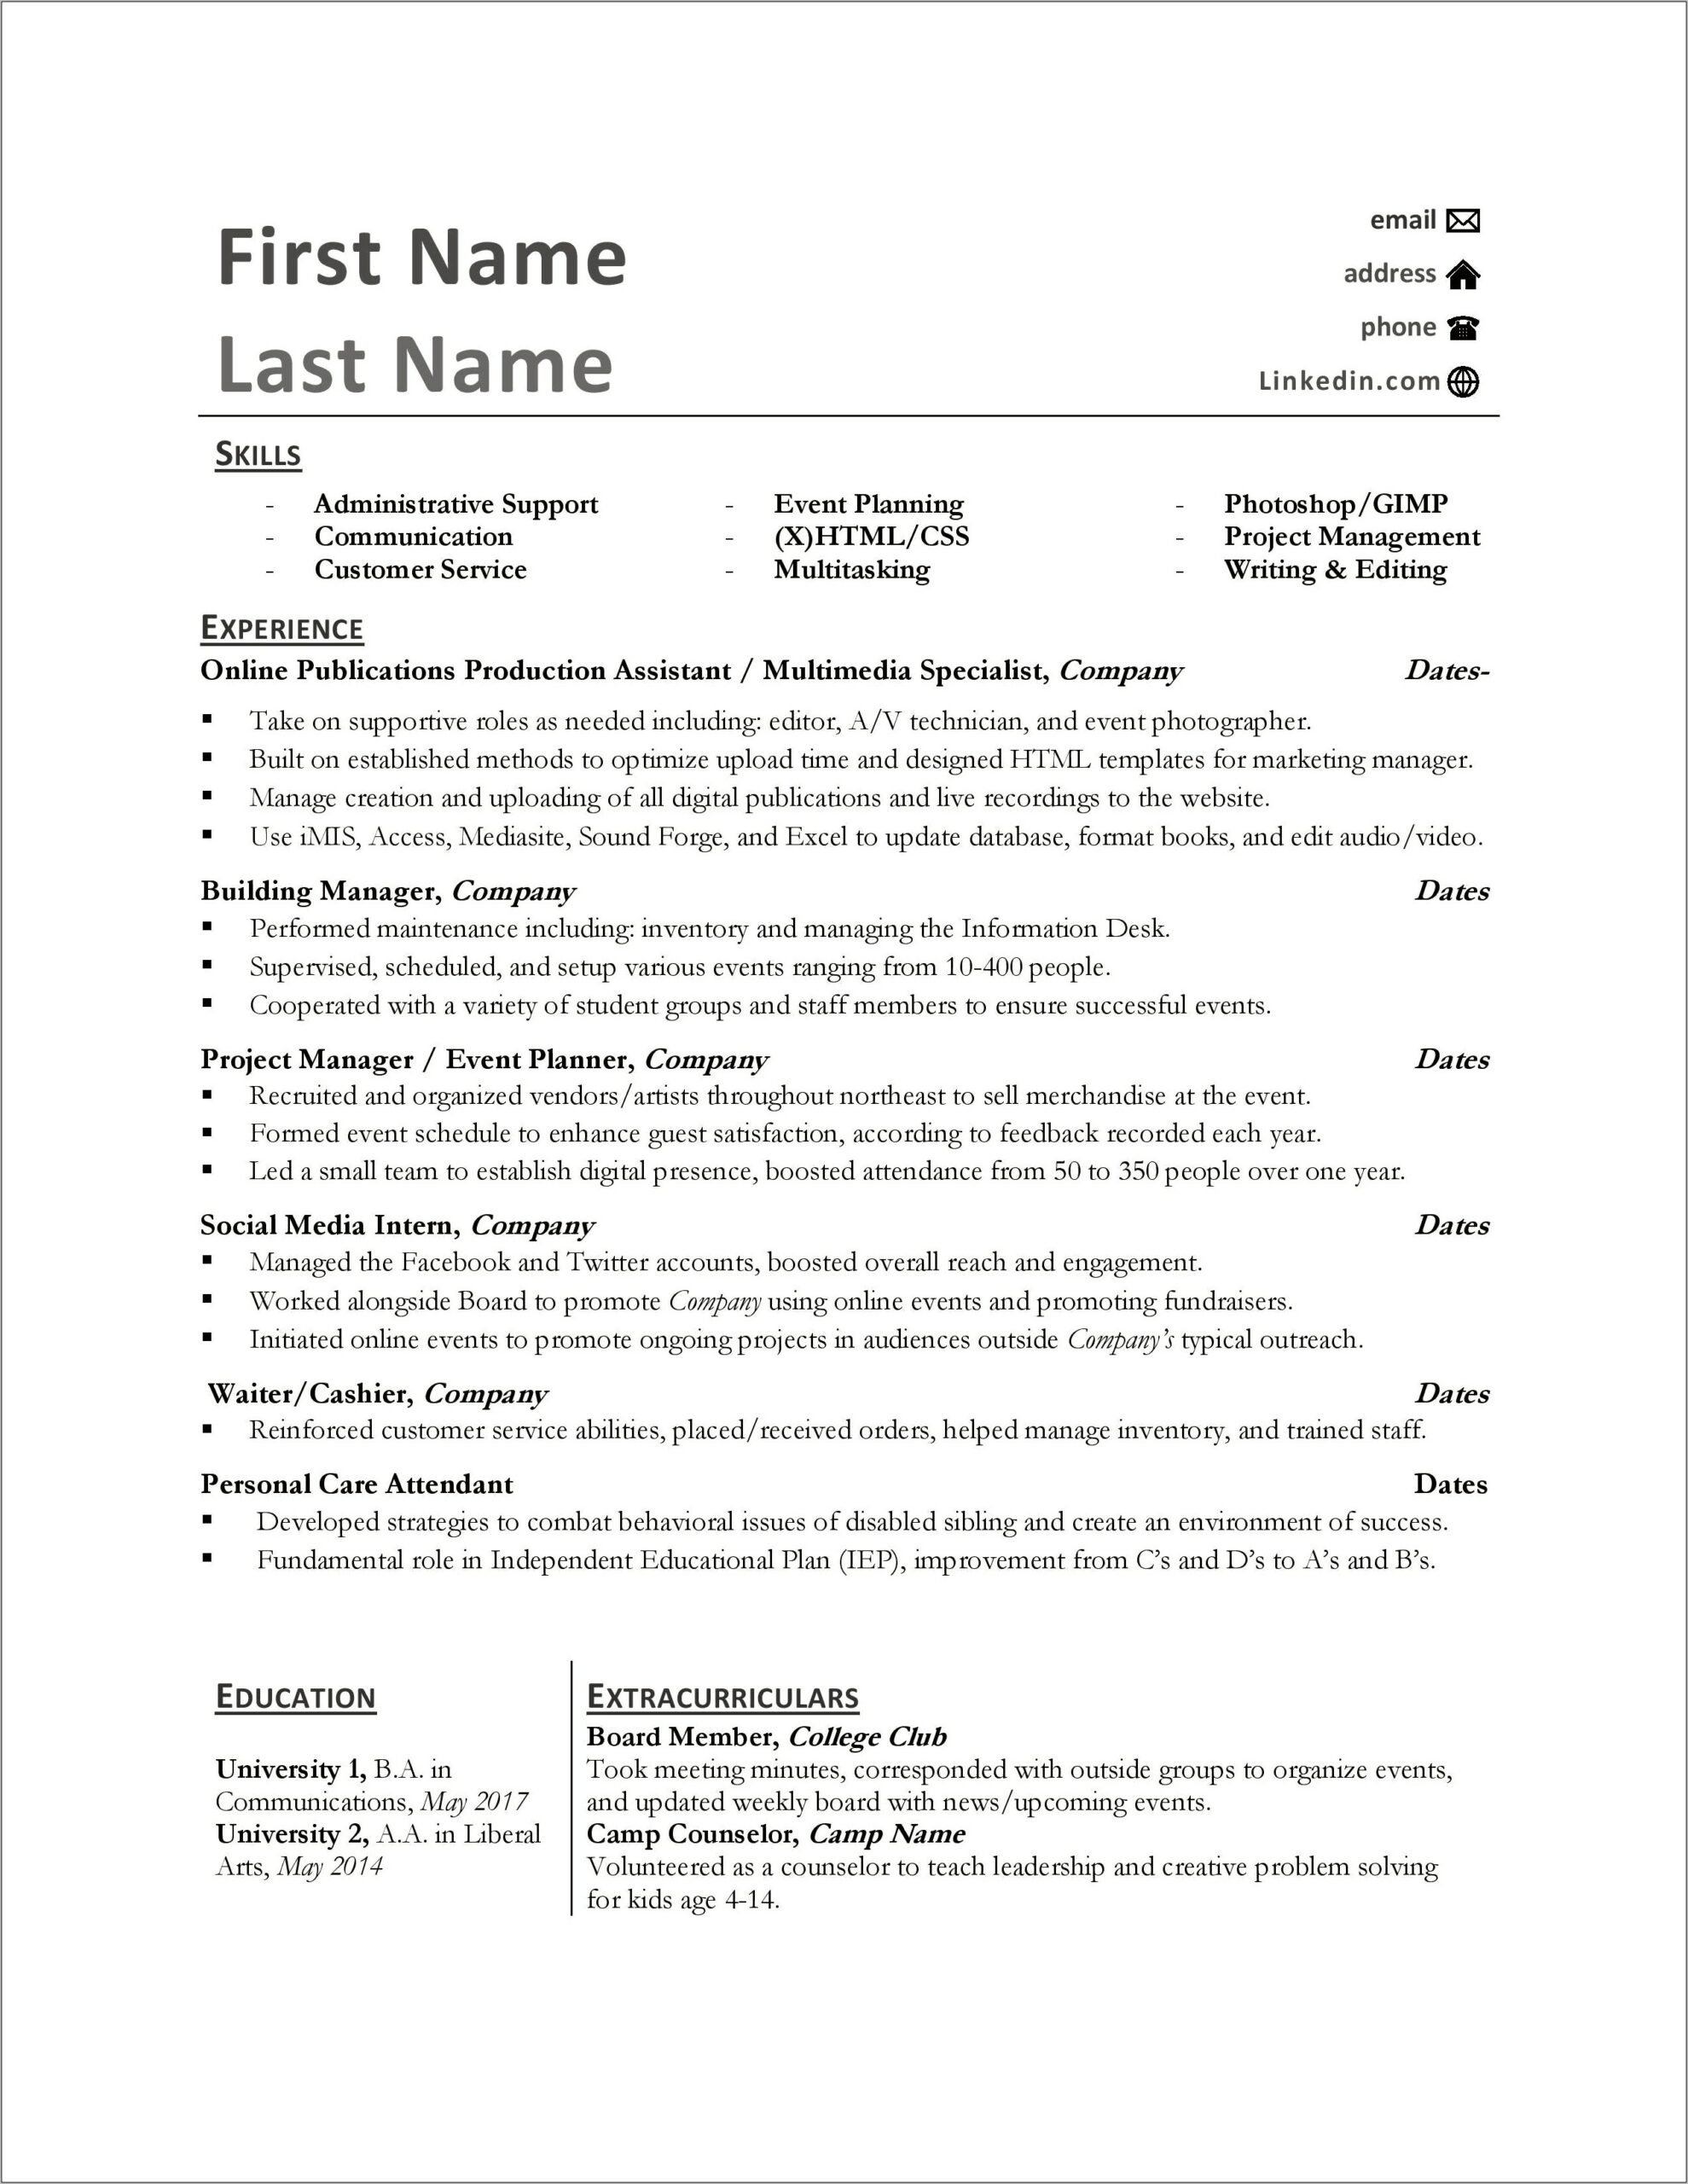 Resume With Different Jobs At The Same Company